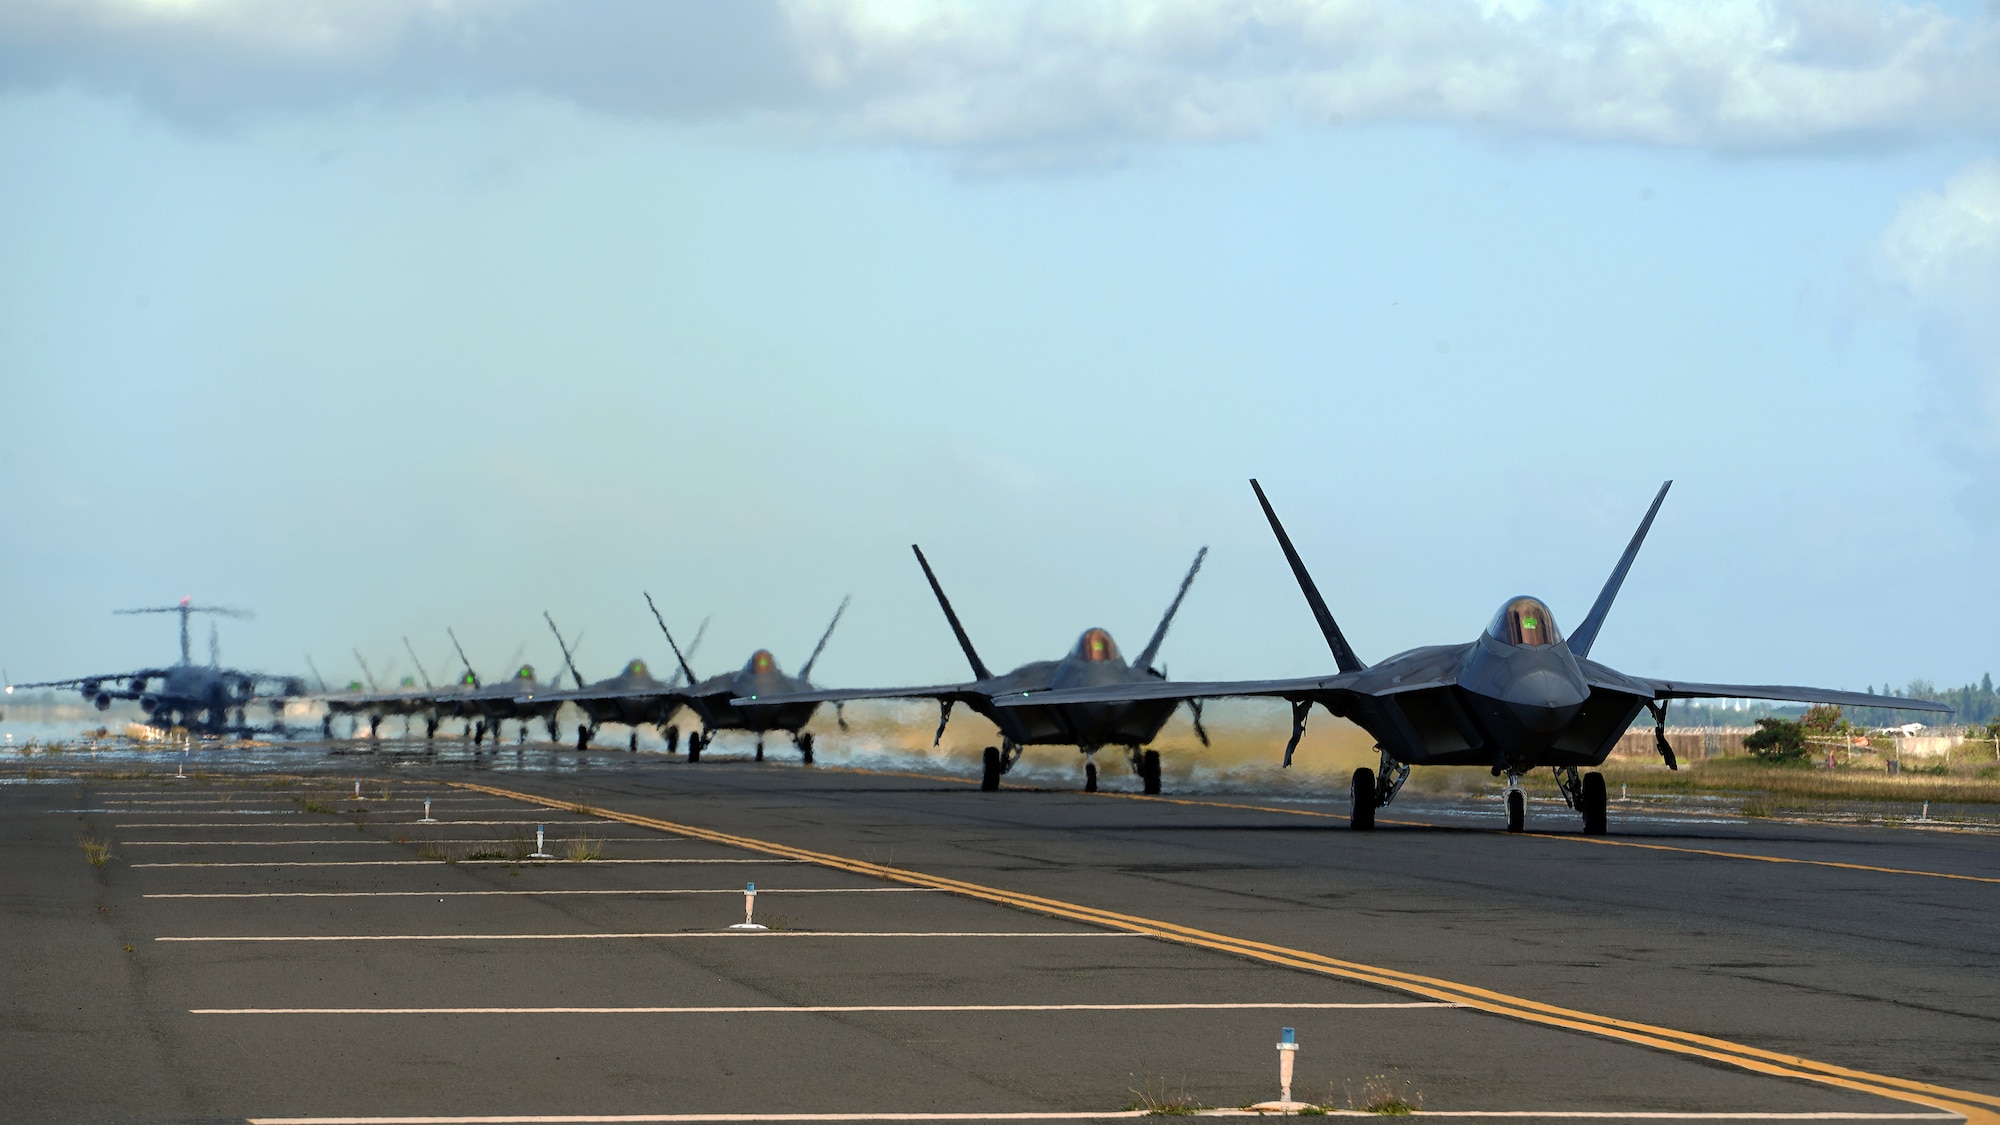 Eight U.S. Air Force F-22 Raptors, a KC-135 Stratotanker and a C-17 Globemaster III taxi on the runway during a routine training schedule April 21, 2020, at Honolulu International Airport, Hawaii. Given the low traffic at the airport due to COVID-19 mitigation efforts, the active-duty 15th Wing and the Hawaii Air National Guard’s 154th Wing seized an opportunity to document the operation which showcases readiness and their unique Total Force Integration construct. The units of Team Hickam work together seamlessly to deliver combat airpower, tanker fuel, and humanitarian support and disaster relief across the Indo-Pacific. (U.S. Air Force photo by Airman 1st Class Erin Baxter)